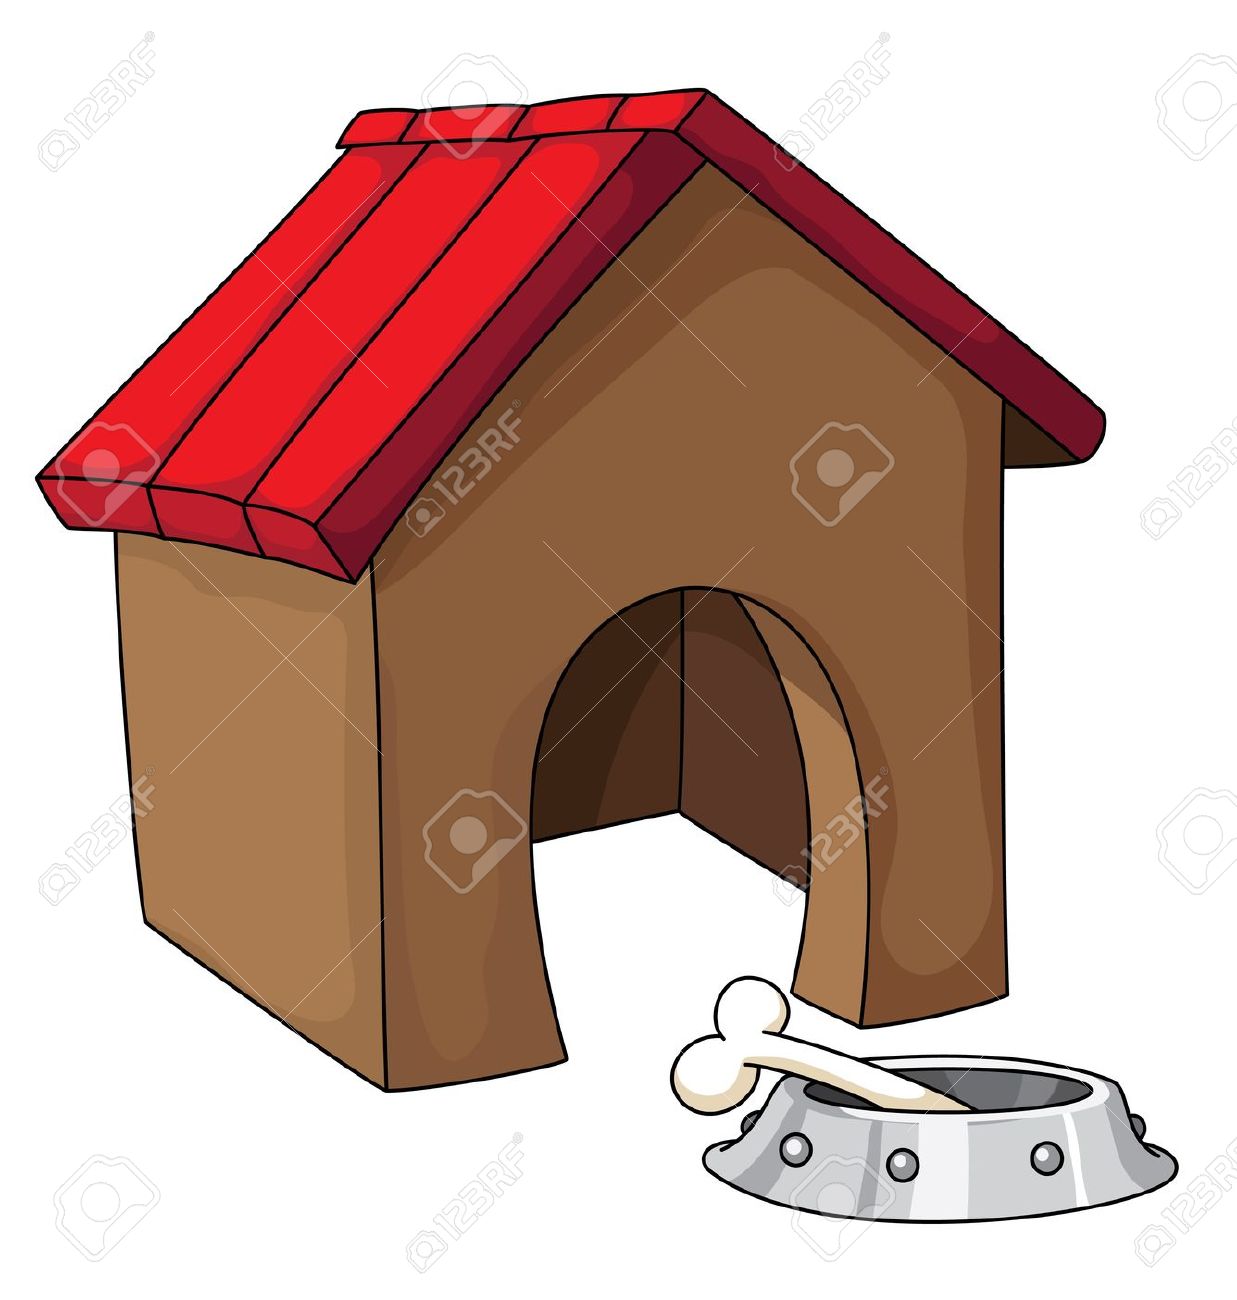 dog kennel clipart - photo #37